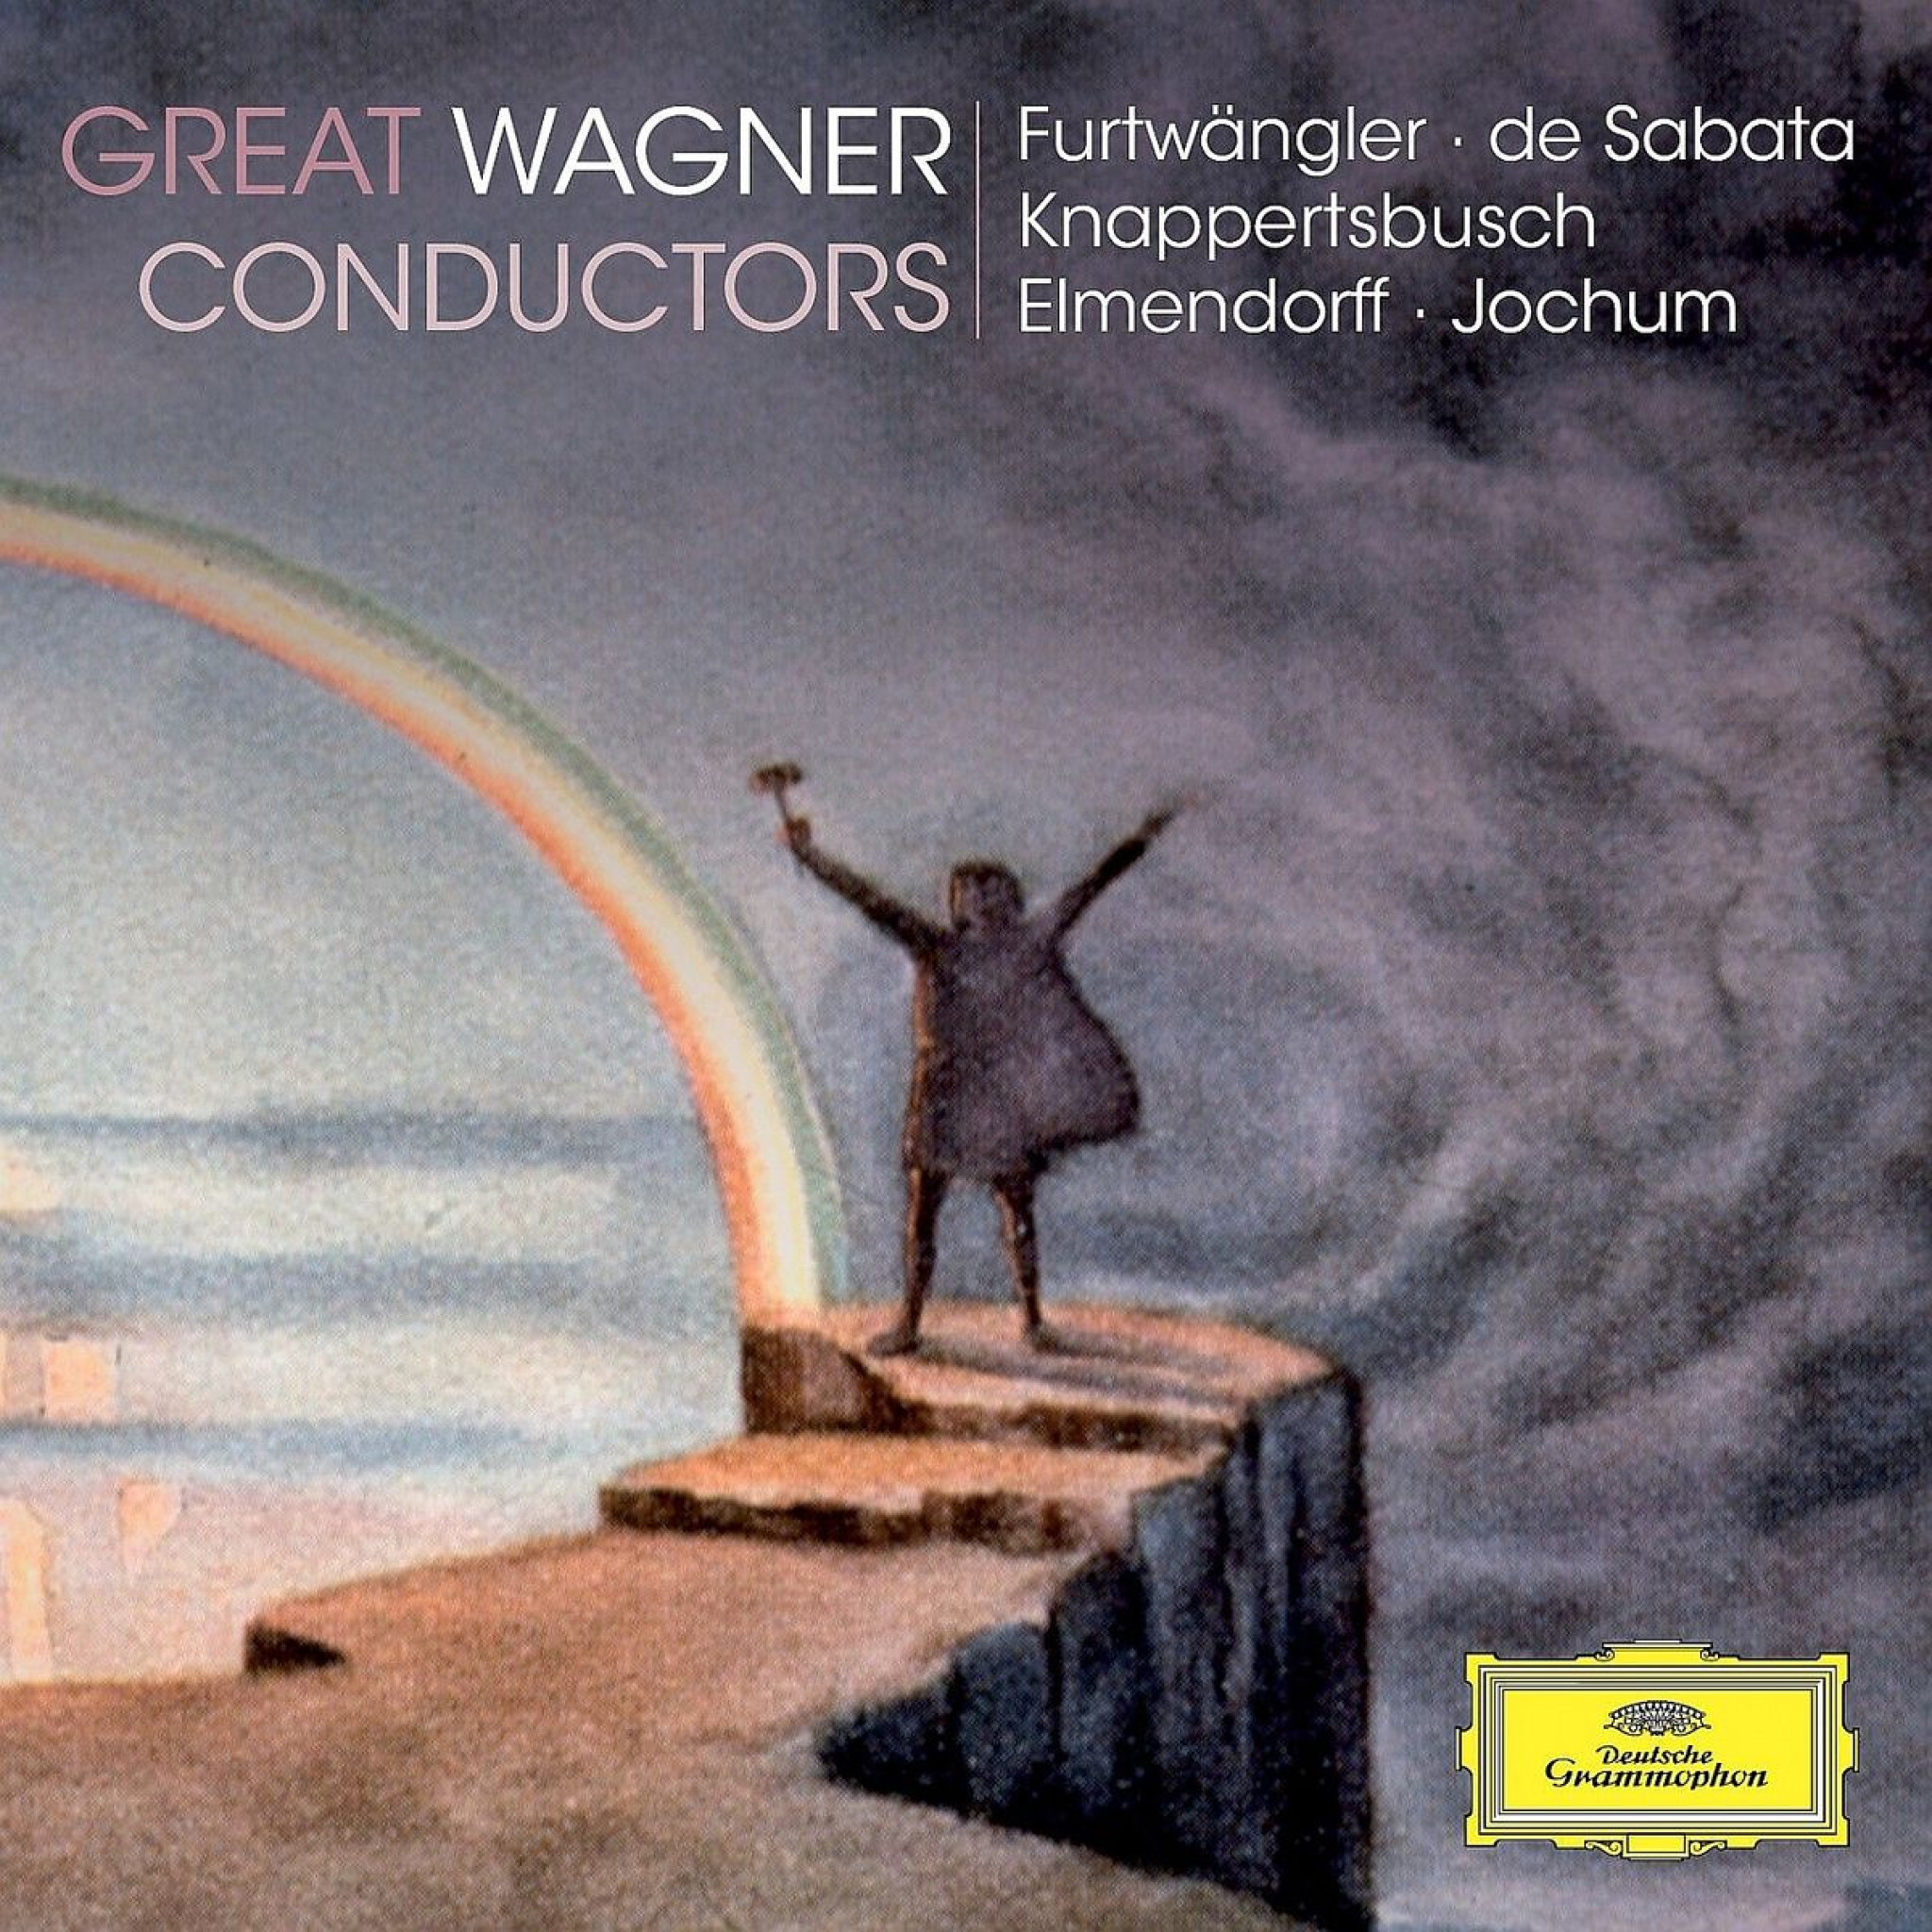 GREAT WAGNER CONDUCTORS